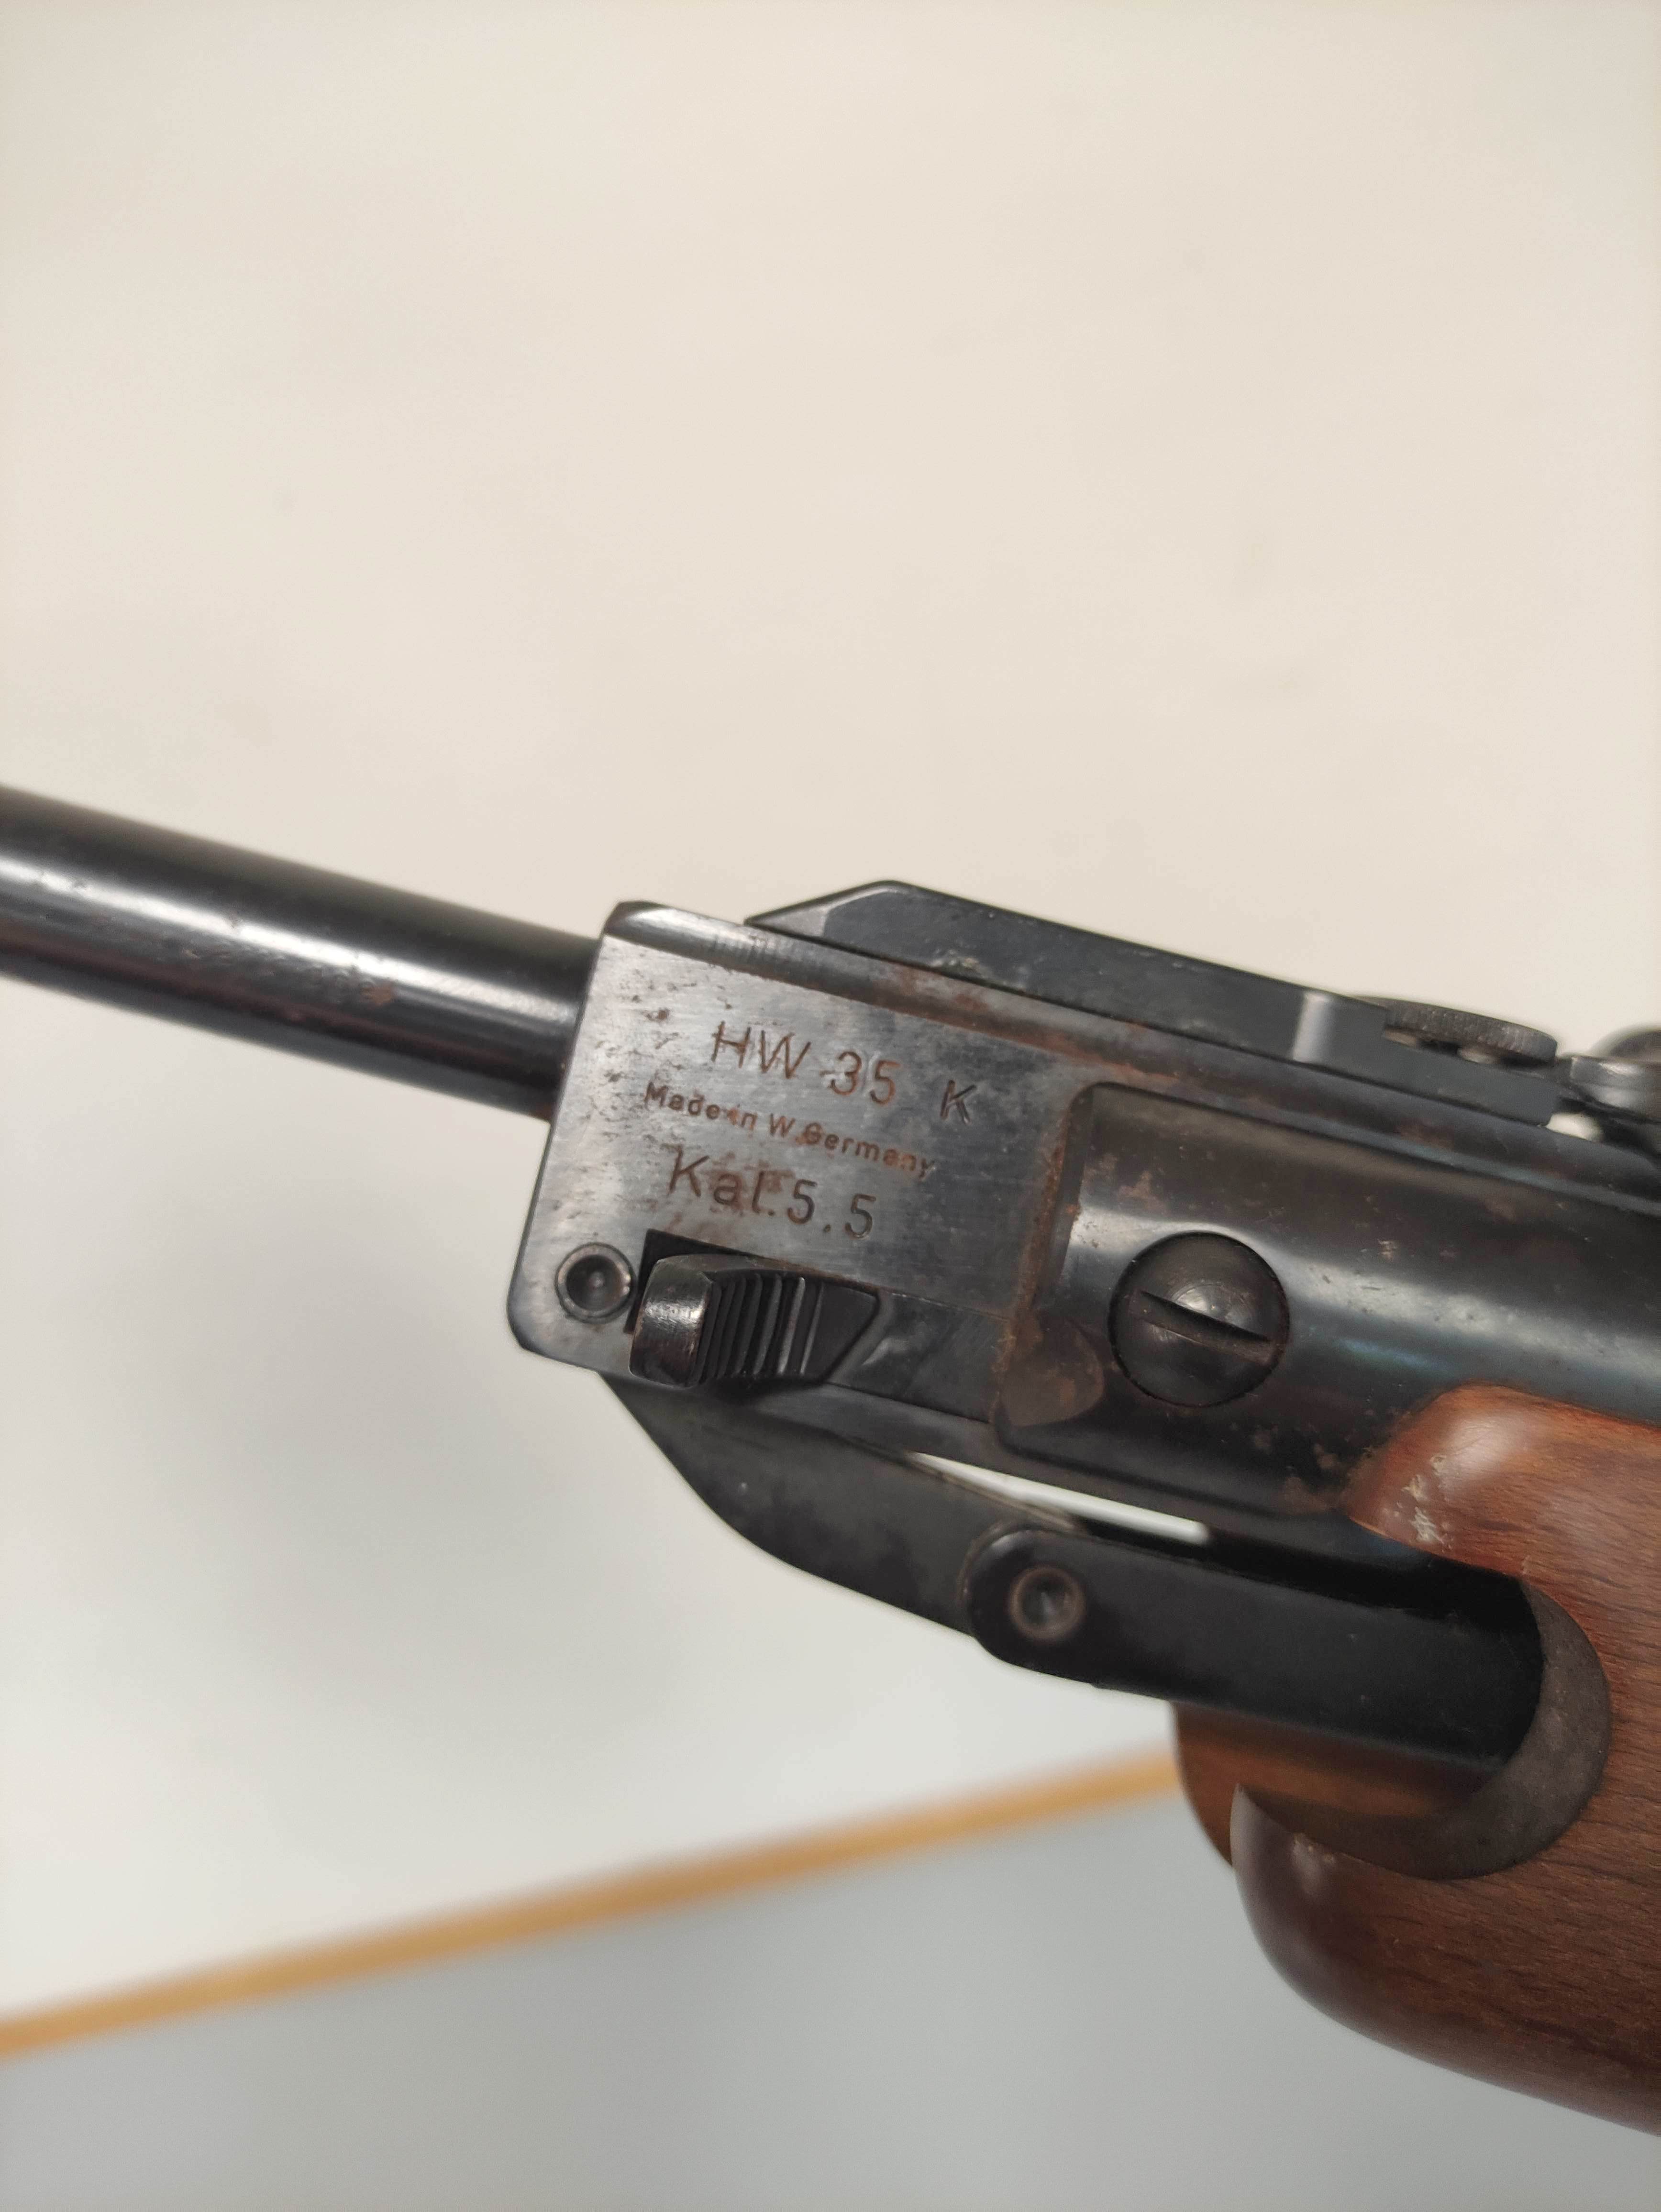 WEIHRAUCH HW35K Kal 5.5 .22 break barrel air rifle serial no 1431511 with ring sight. - Image 3 of 6